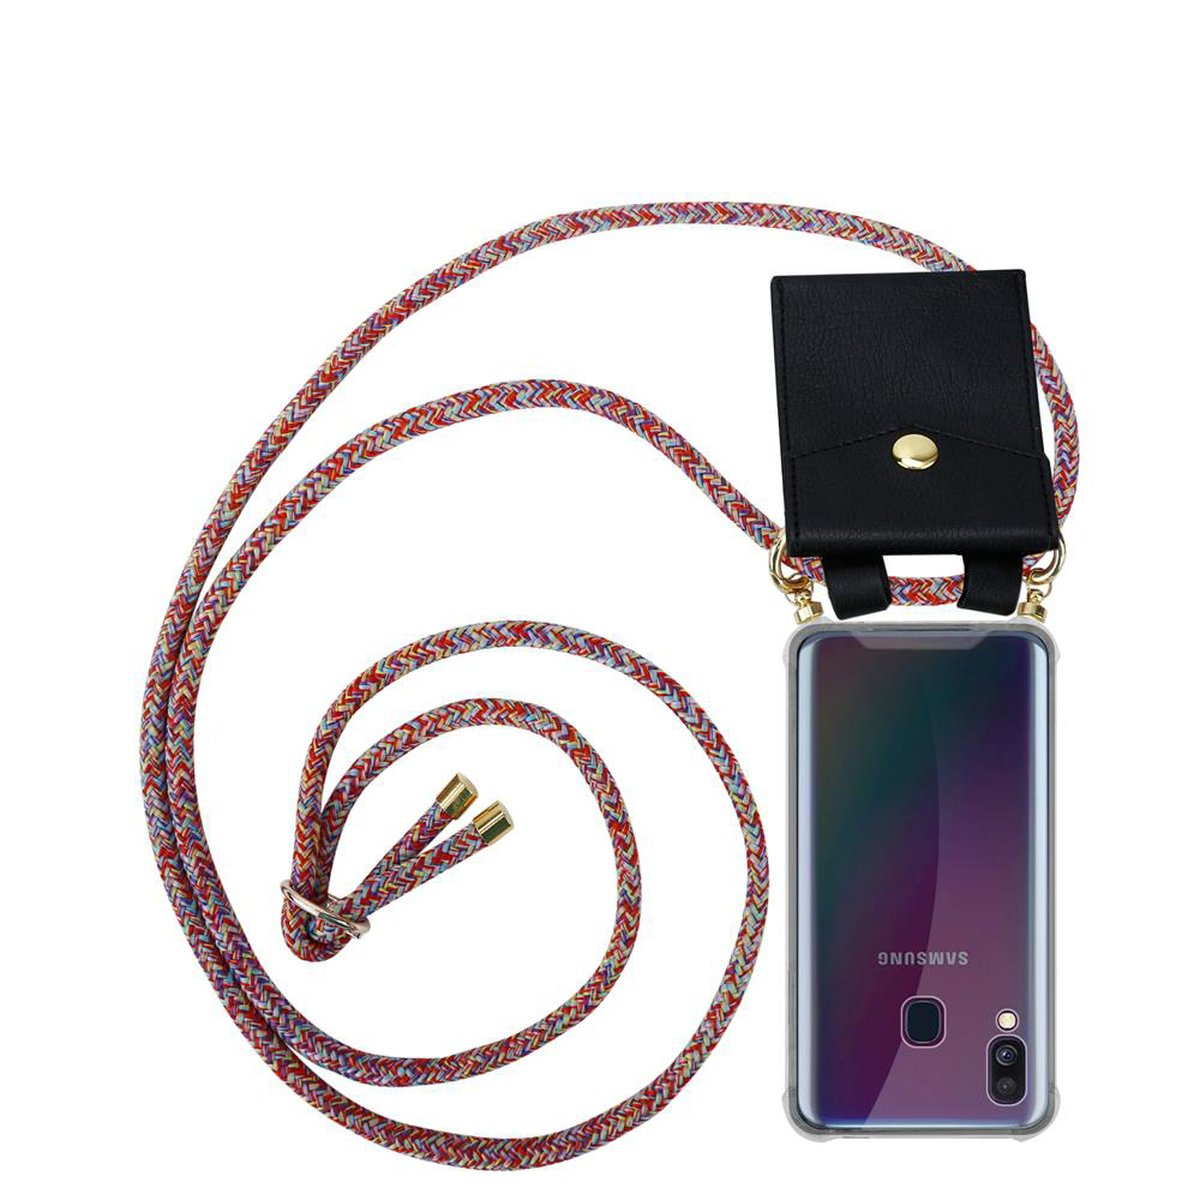 CADORABO Handy Kette mit PARROT Hülle, Kordel Galaxy A40, abnehmbarer Backcover, Ringen, COLORFUL Samsung, Gold Band und